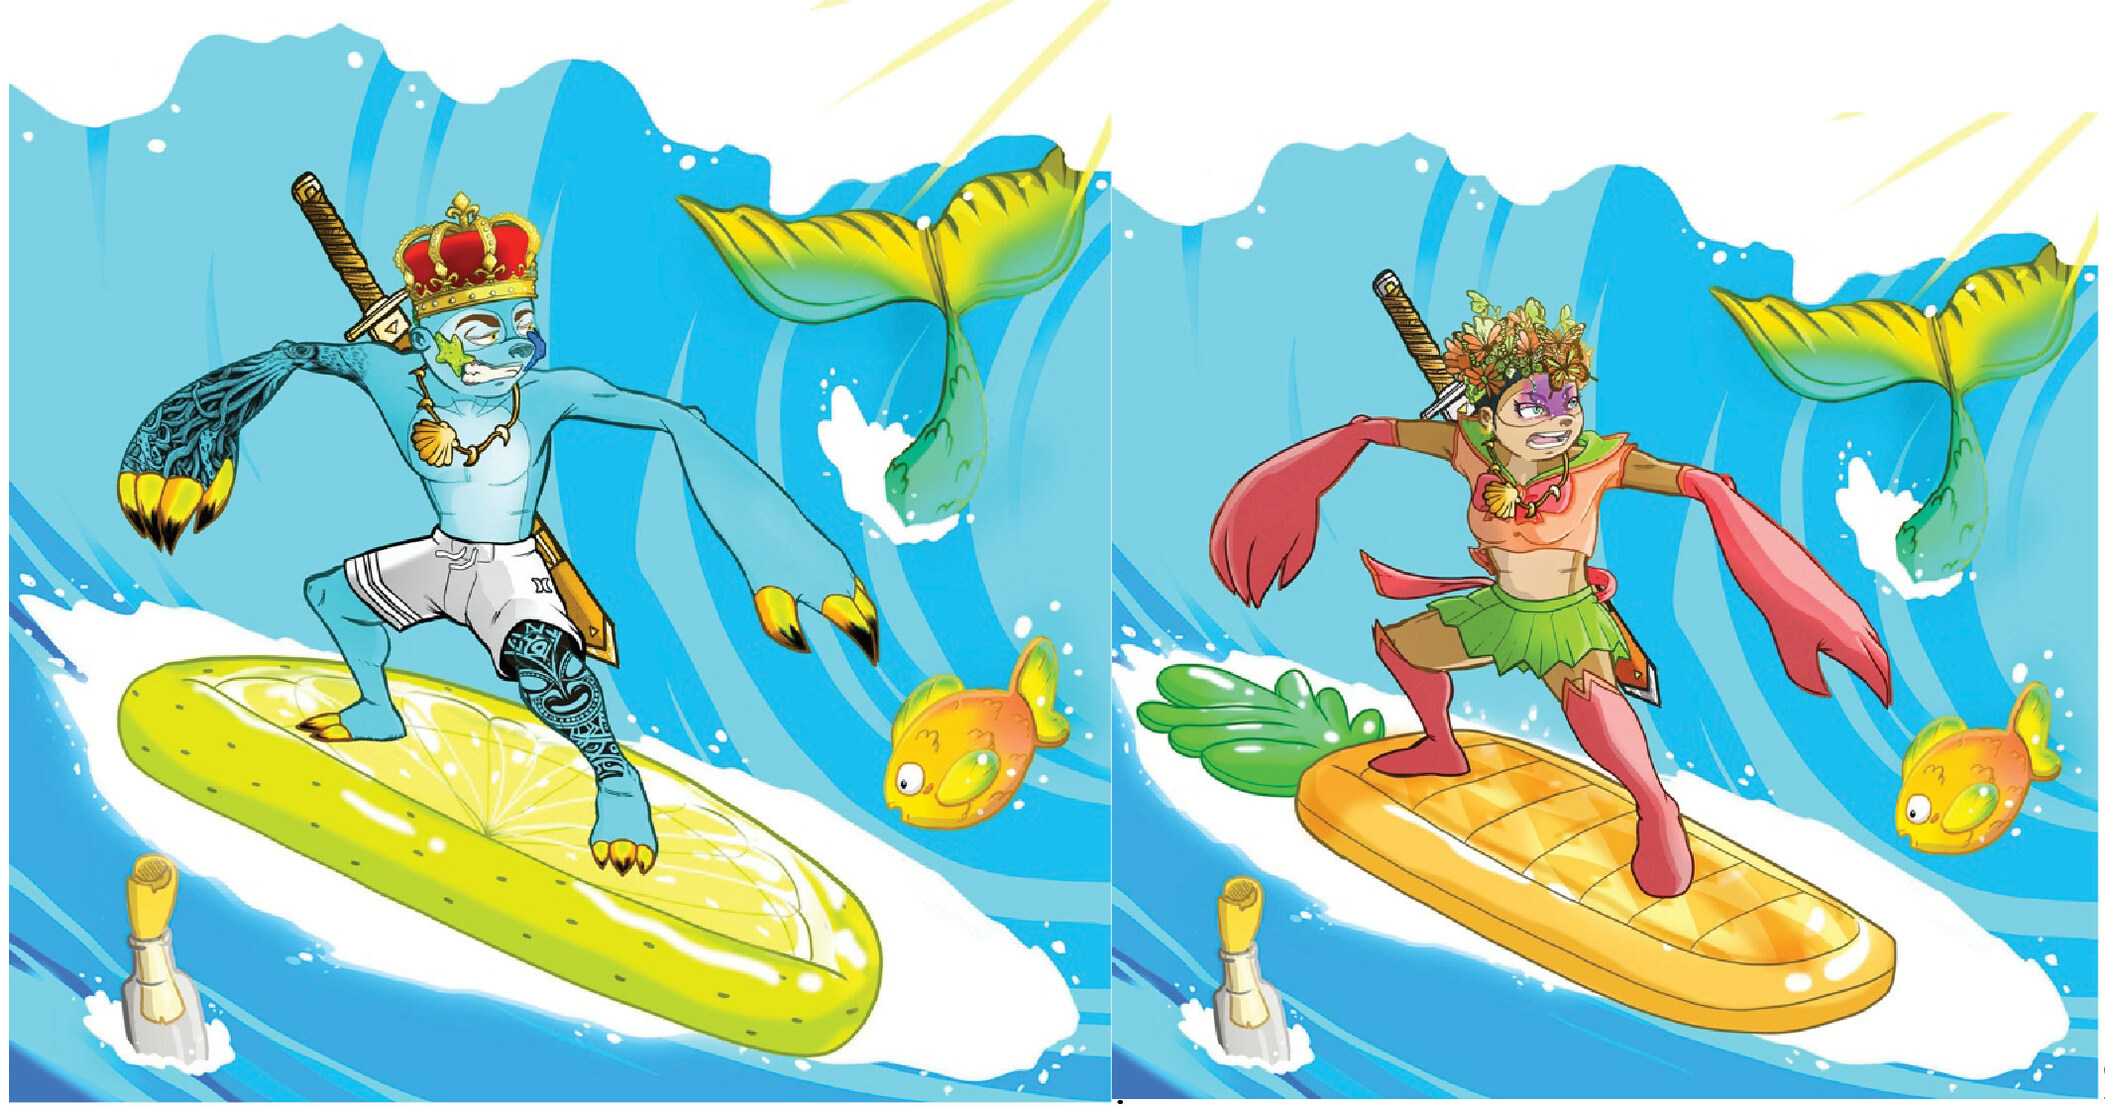 Hurley is Building an Army of Miniature Mutant Super Surfers